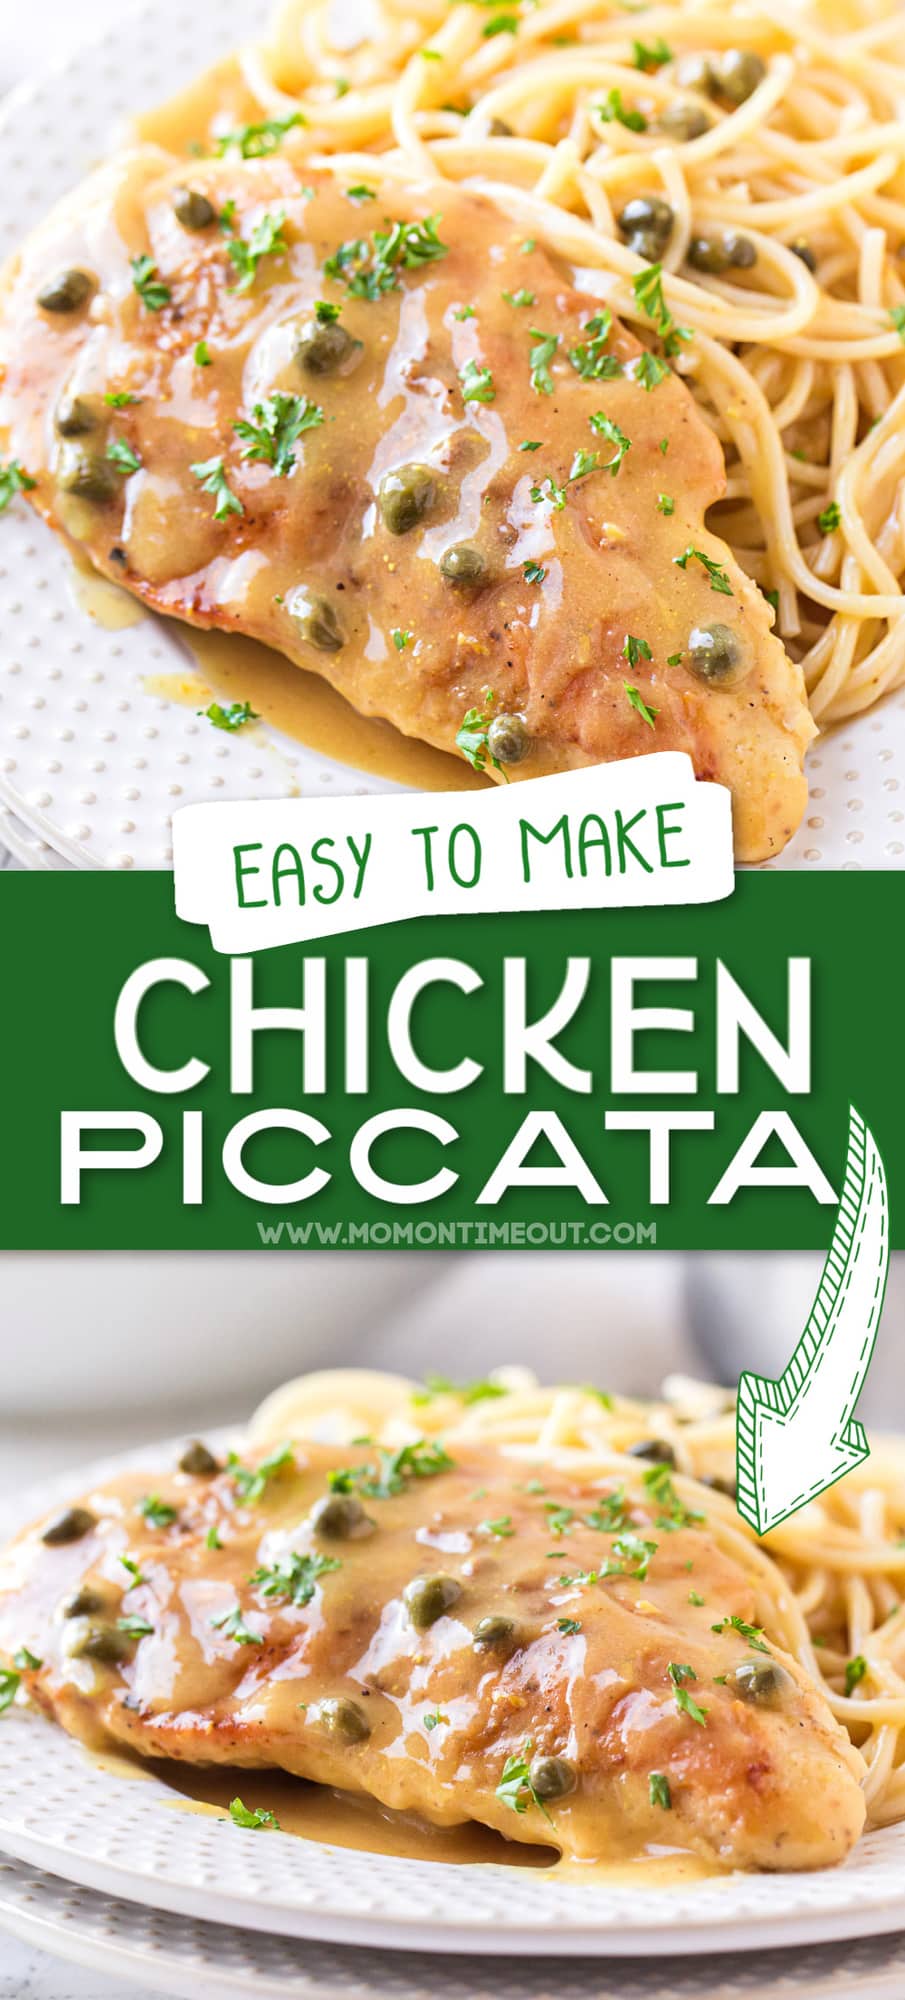 Chicken Piccata Recipe - Ready In 20 Minutes! - Mom On Timeout